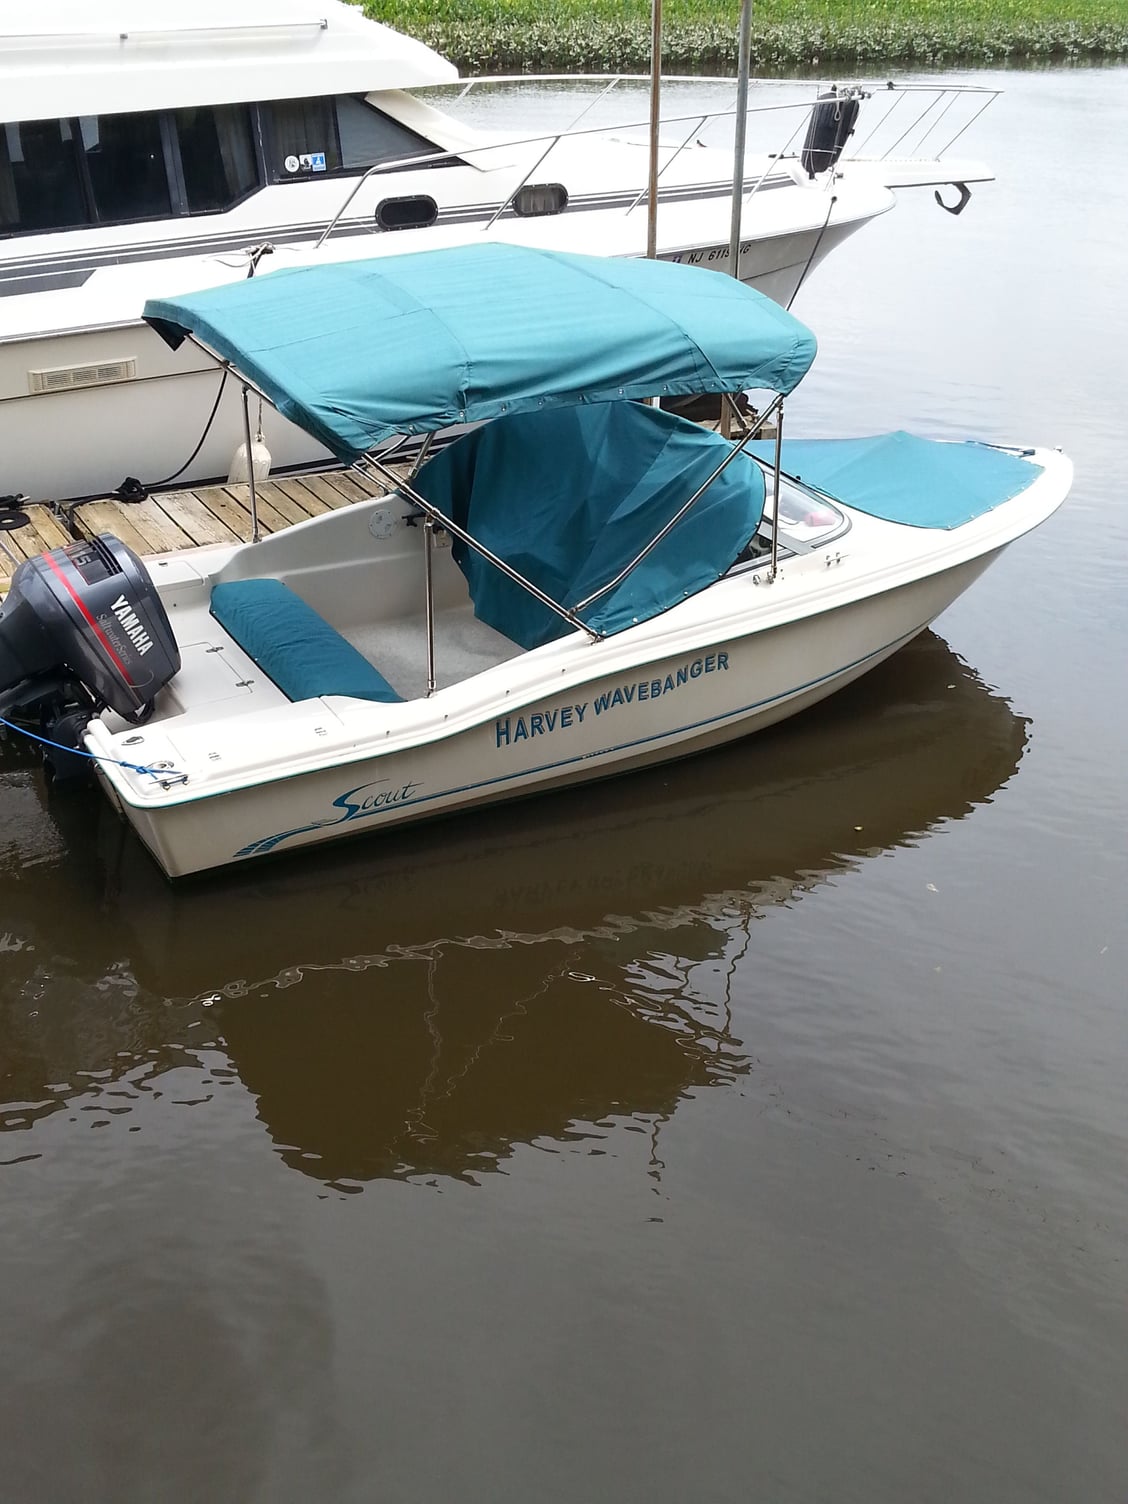 Bad gas, or condensation? - The Hull Truth - Boating and Fishing Forum